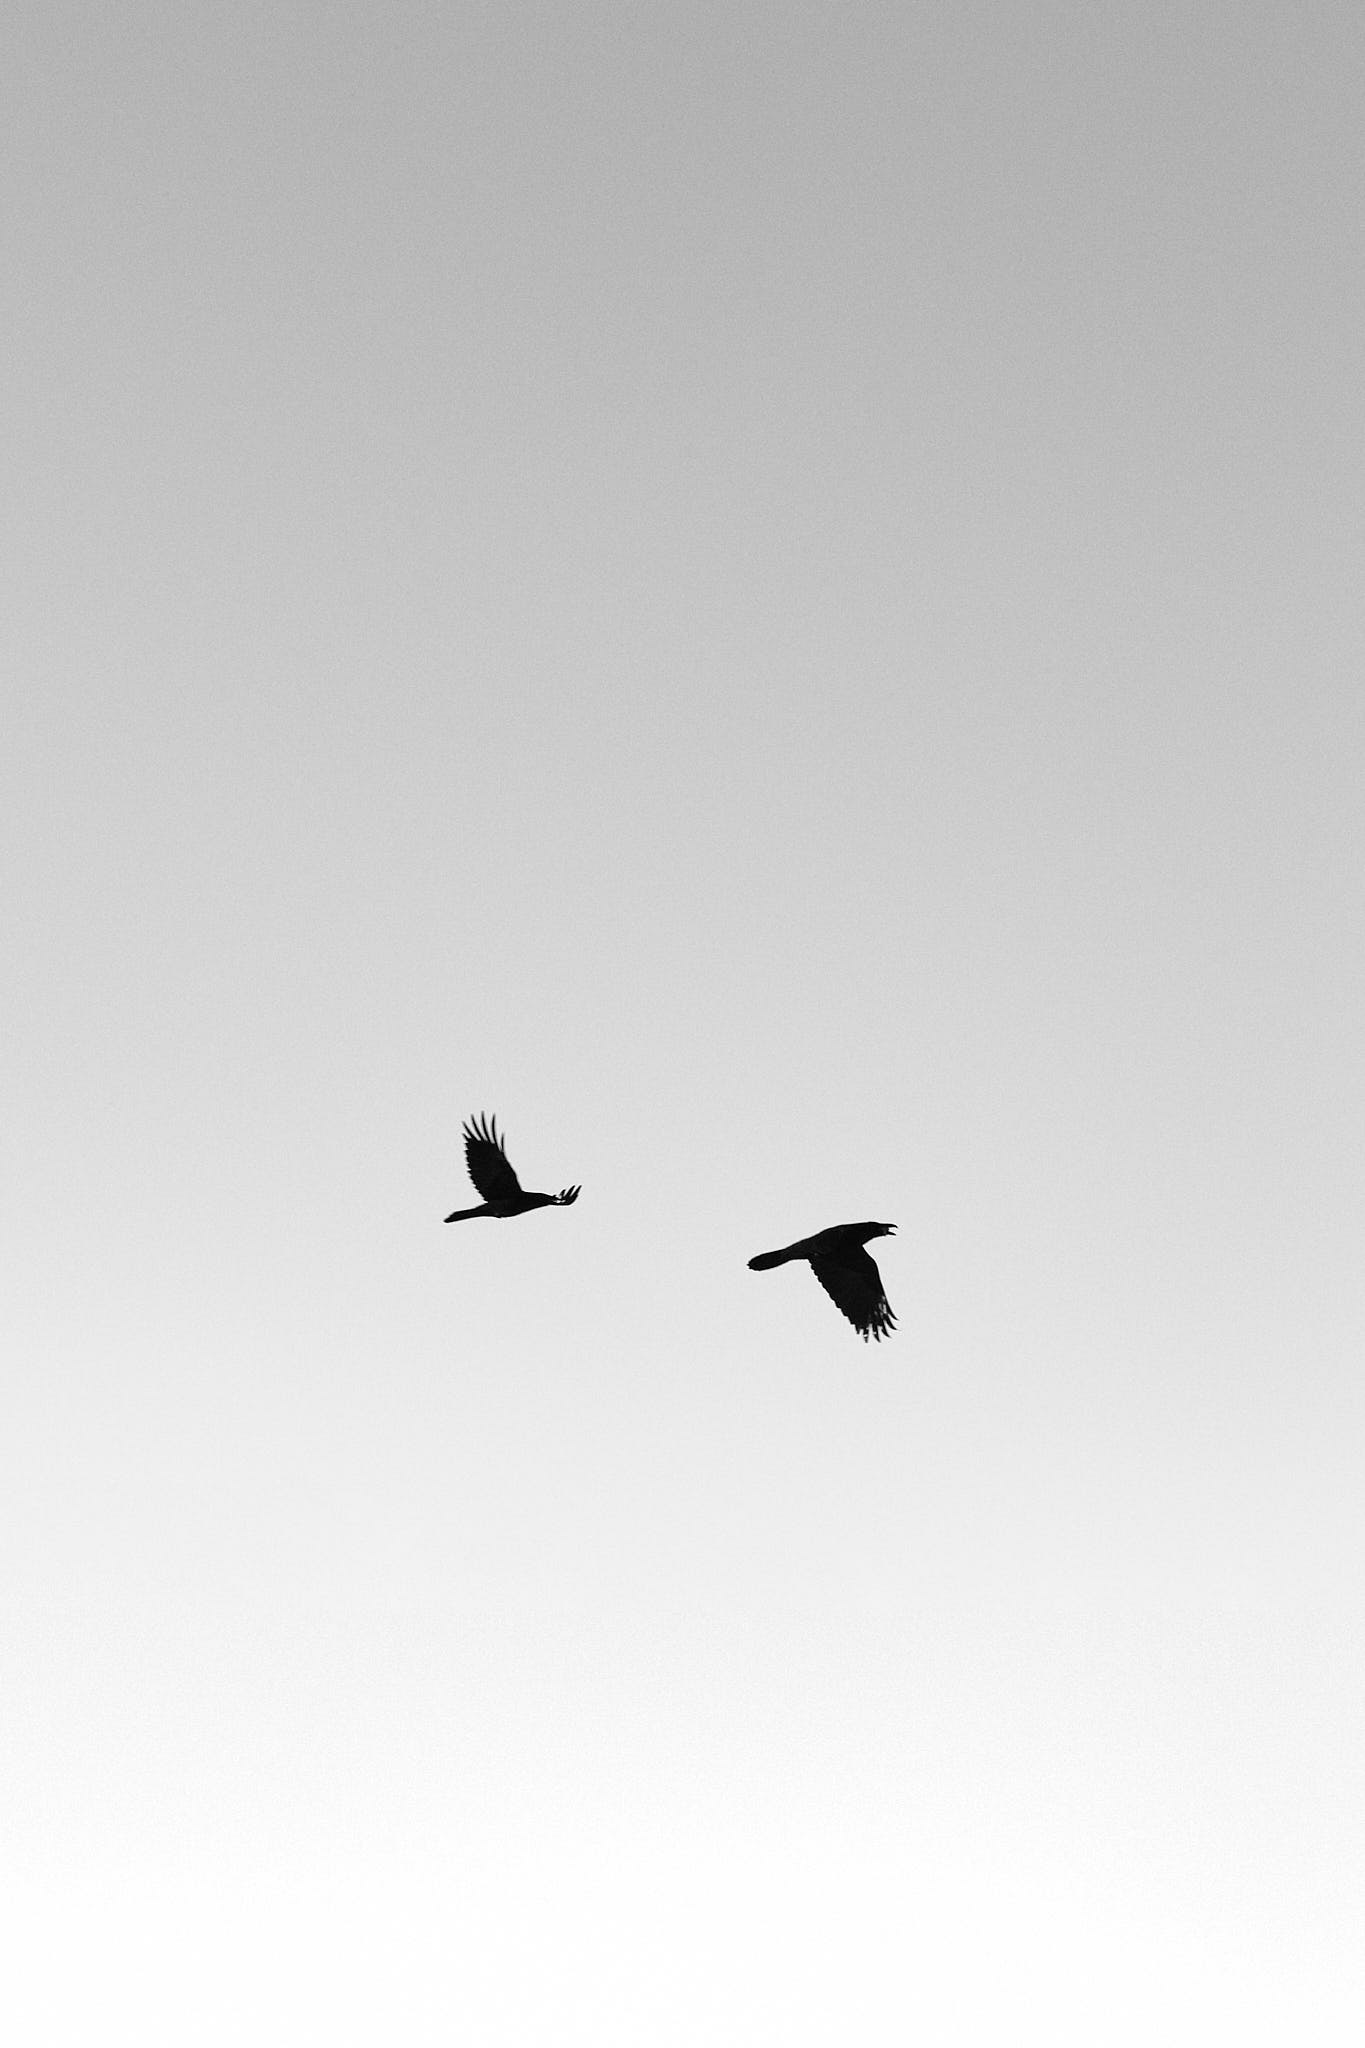 Two ravens fly against a grey sky